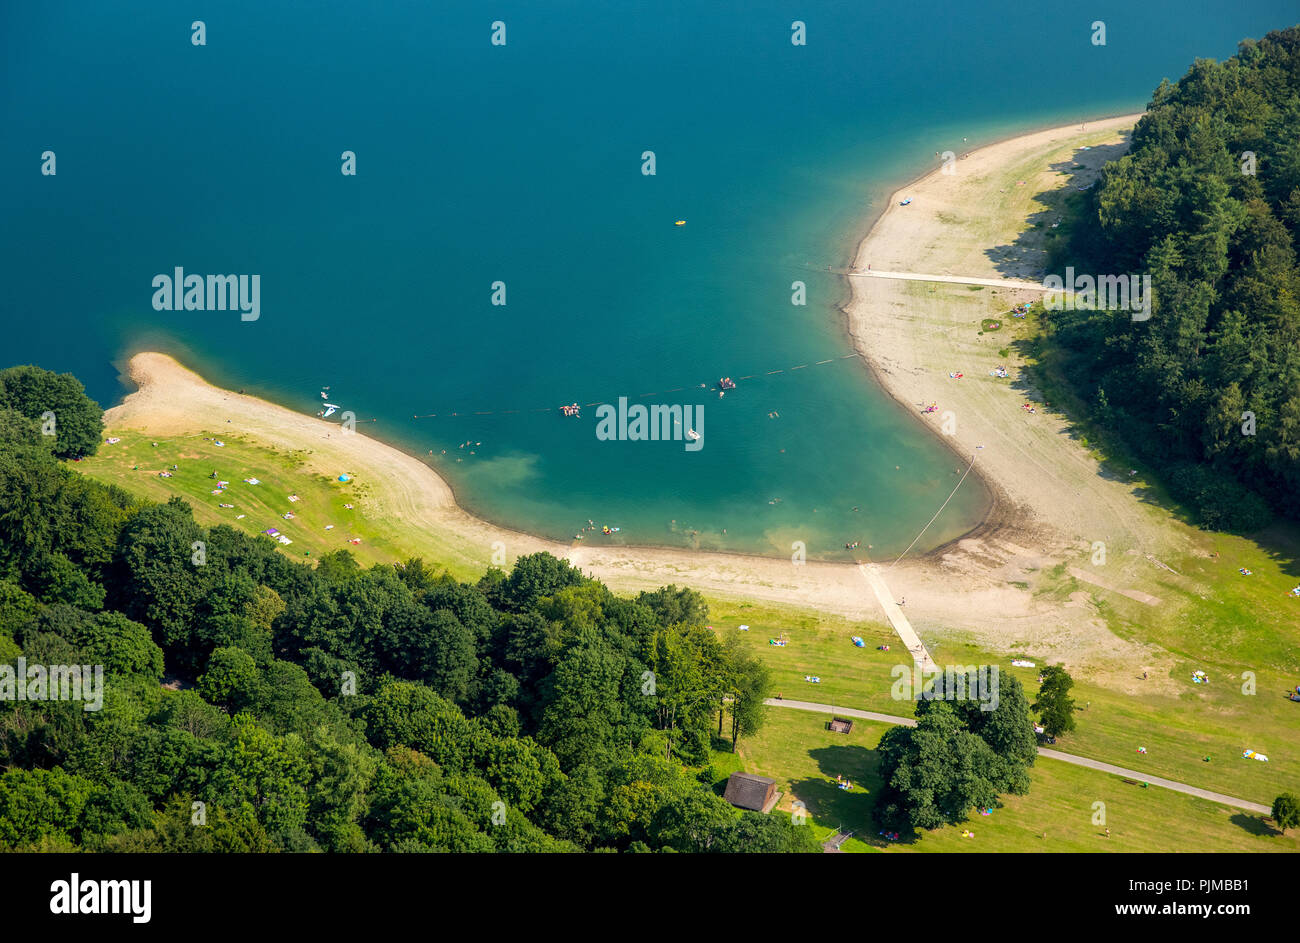 Hennestausee, Hennesee with sandy beach and dams, Meschede, Sauerland, North Rhine-Westphalia, Germany Stock Photo